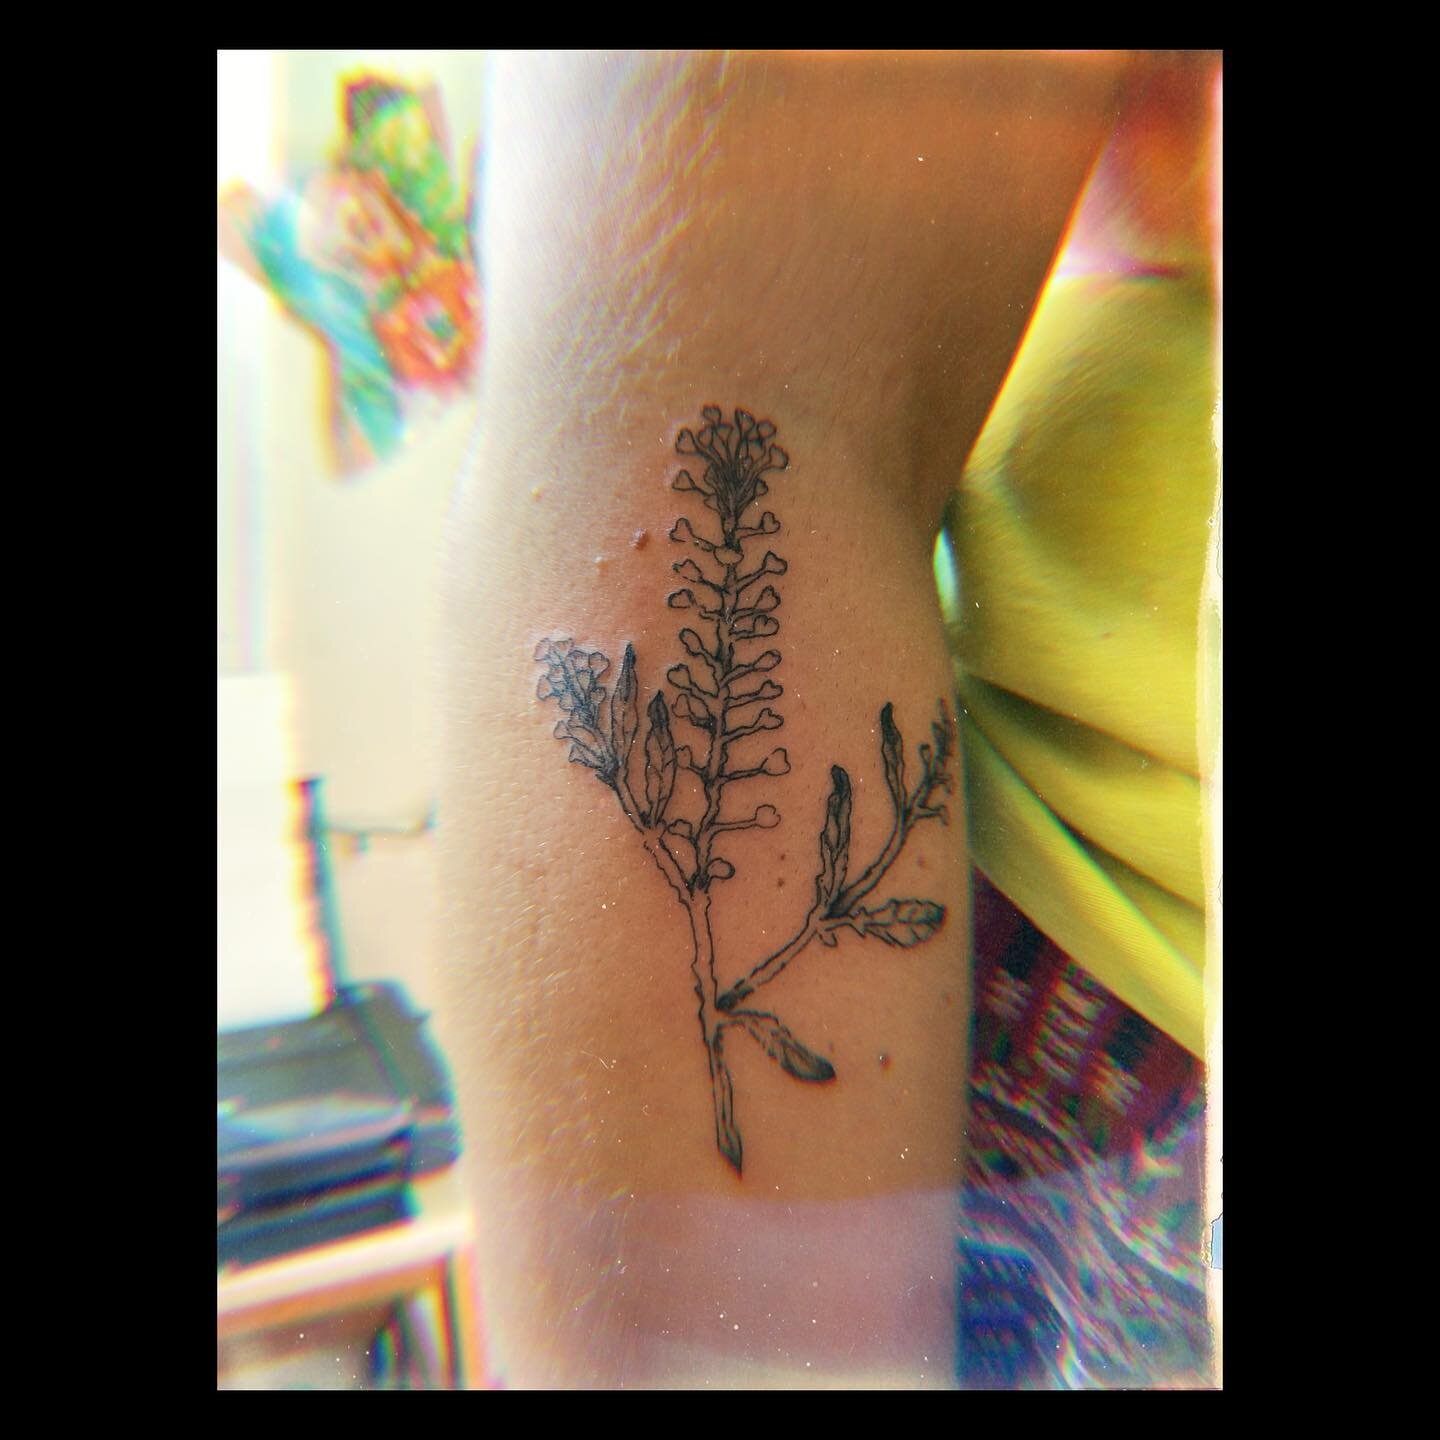 A lil sprig of Pennycress for Becca
🌿🌱🌿🌱🌿🌱🌿🌱🌿